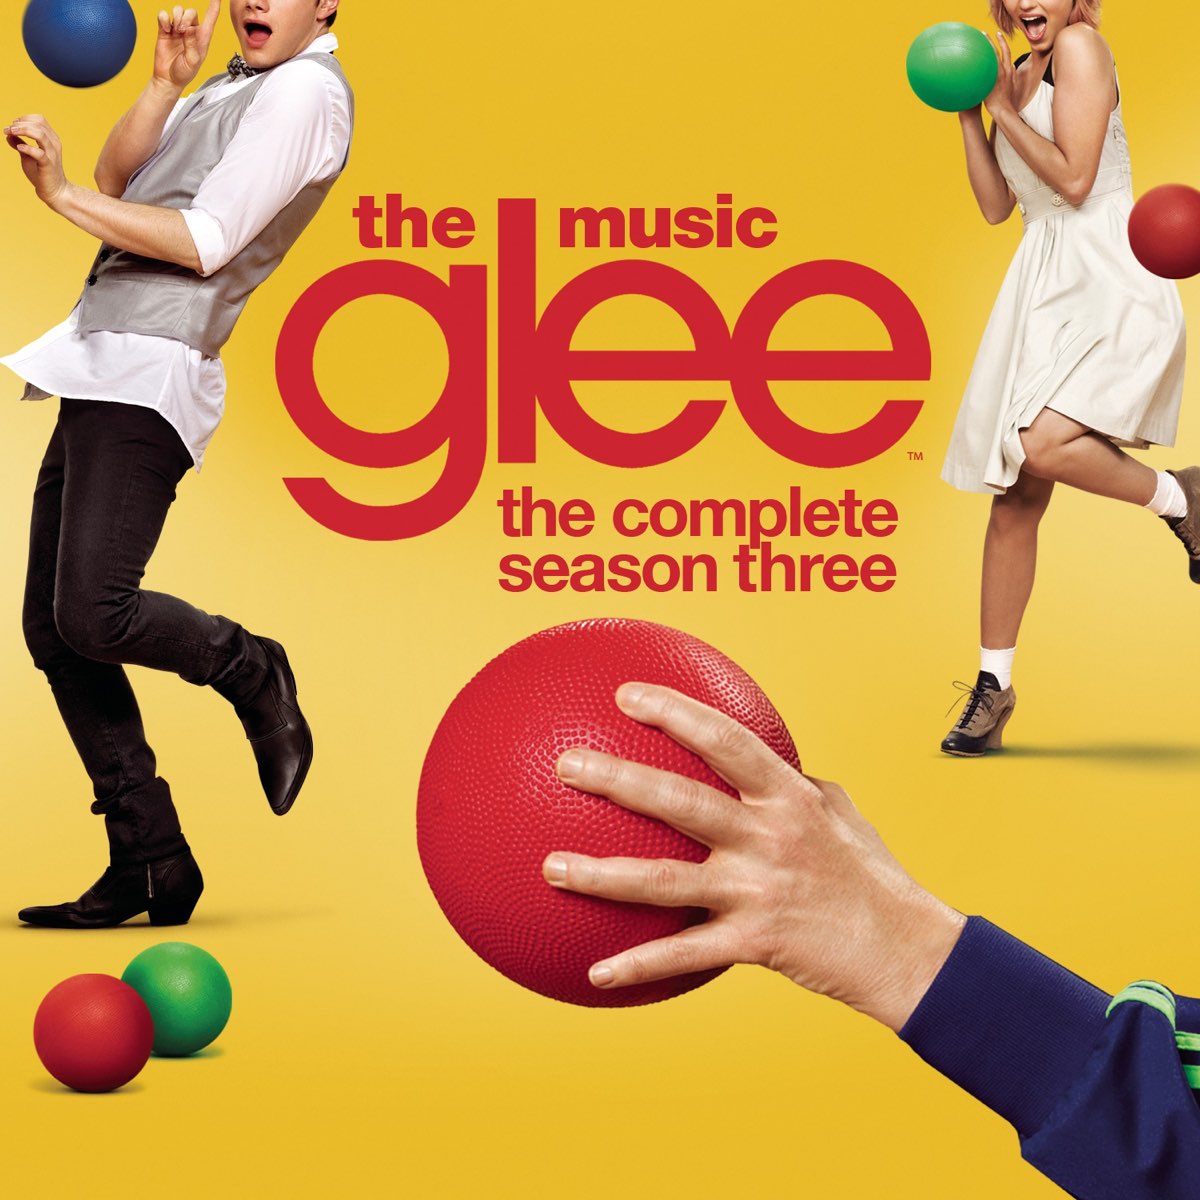 Glee: The Music - The Complete Season Three by Glee Cast on Apple Music